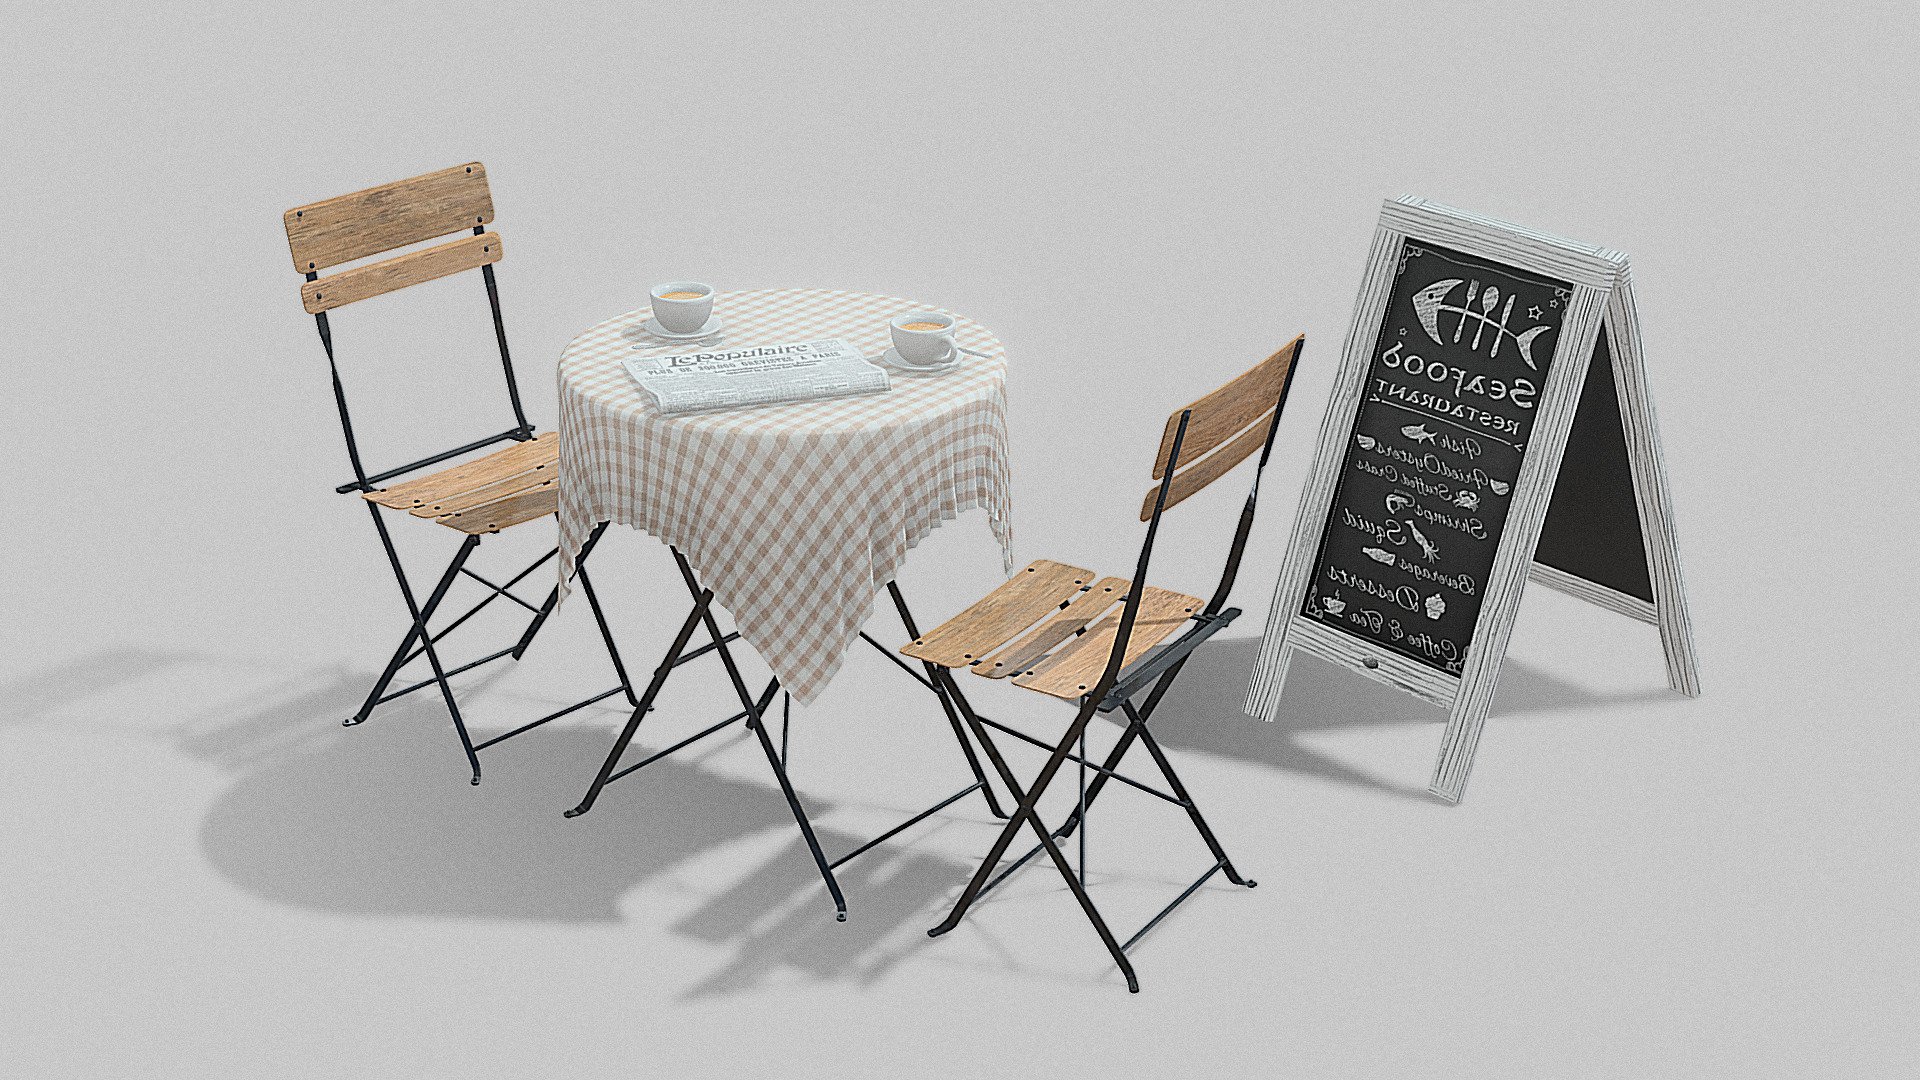 This Street cafe objects is a high end, photorealistic 3D model, that is created to help you add the realism to your project.

The model is suitable for any visual production - broadcast, high-res film close-ups, advertising, games, design visualization, forensic presentation, animated movie production, still illustration etc.

Model has real world scale, clean optimized topology. Scene contains table, chair, coffee cup, spoon, newspaper, sidewalk chalkboard menu 3d model